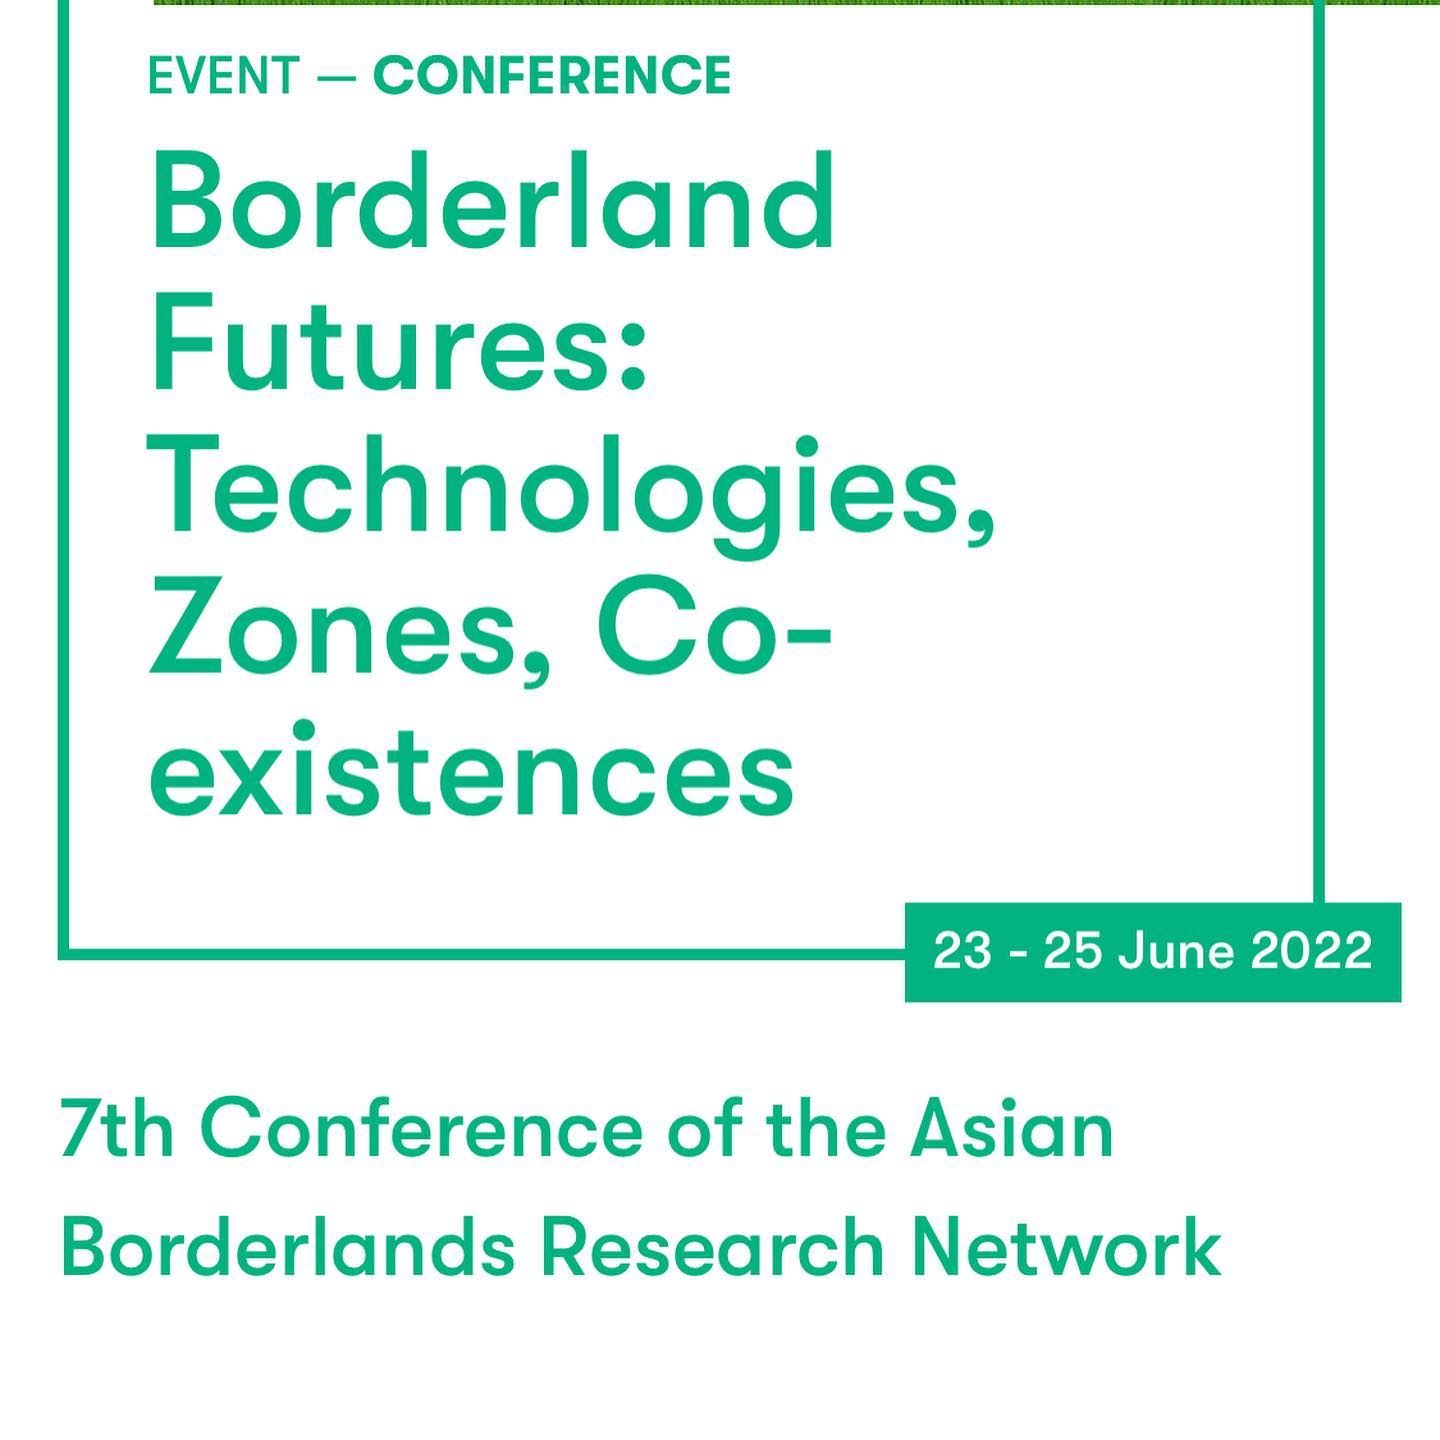 Dongwoo to Speak at 7th Asian Borderlands Research Network Conference: Borderland Futures